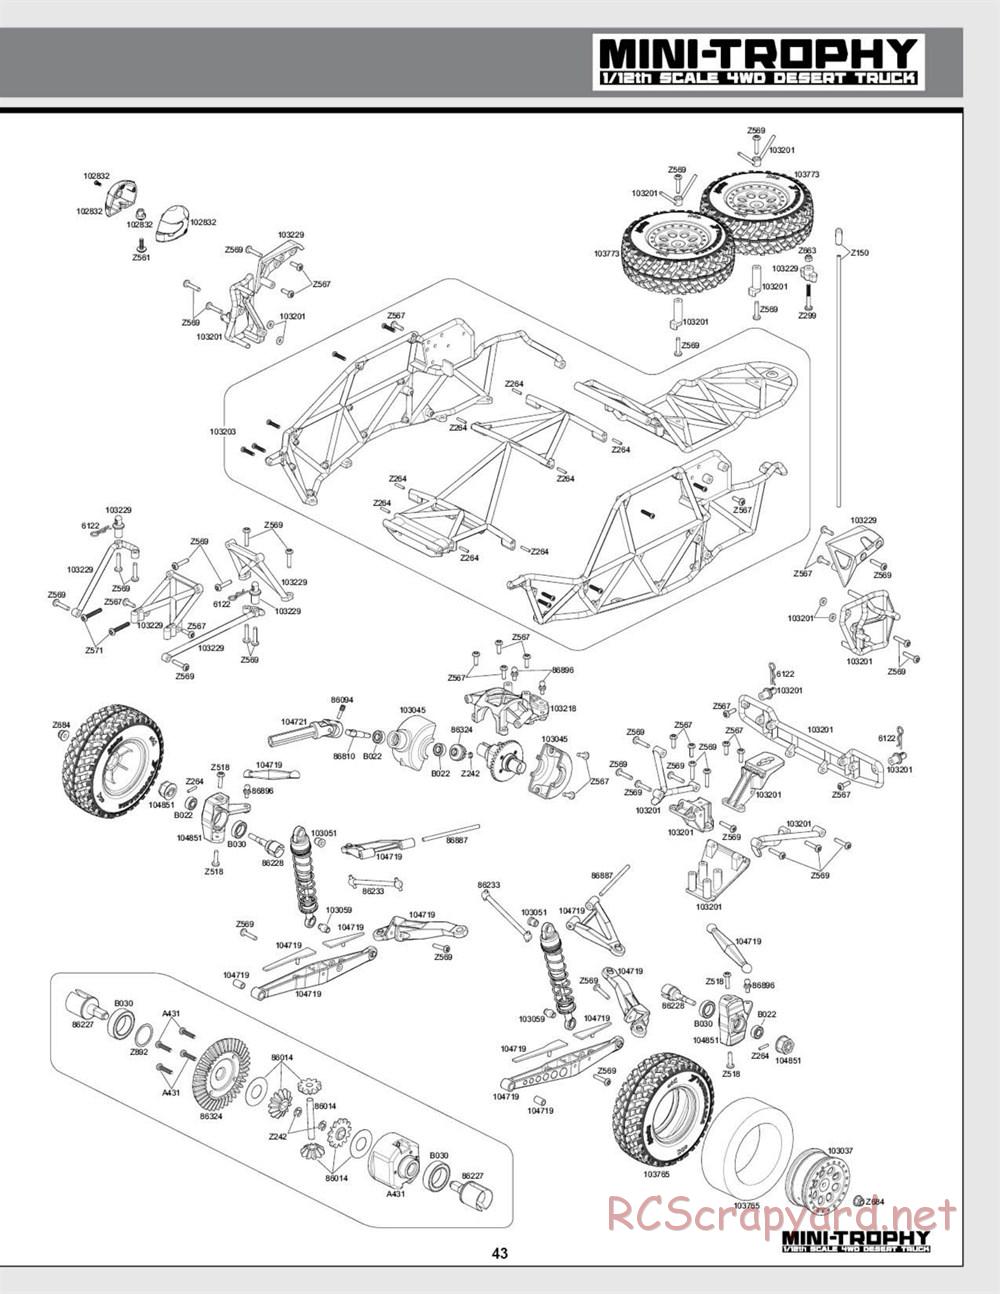 HPI - Mini Trophy - Desert Truck - Exploded View - Page 43